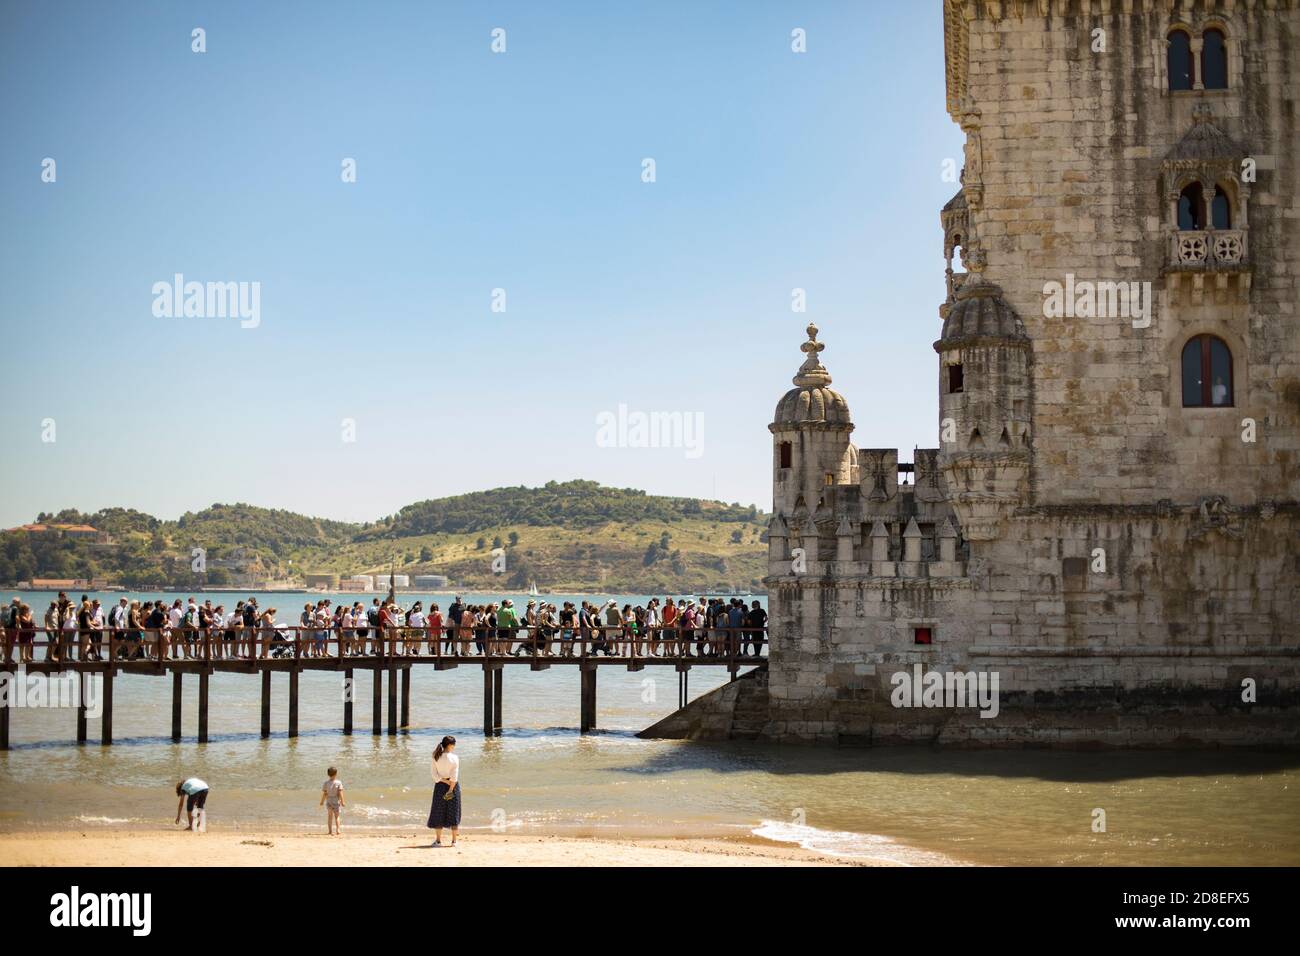 Belém Tower on the Tagus River in Lisbon, Portugal, Europe. Stock Photo